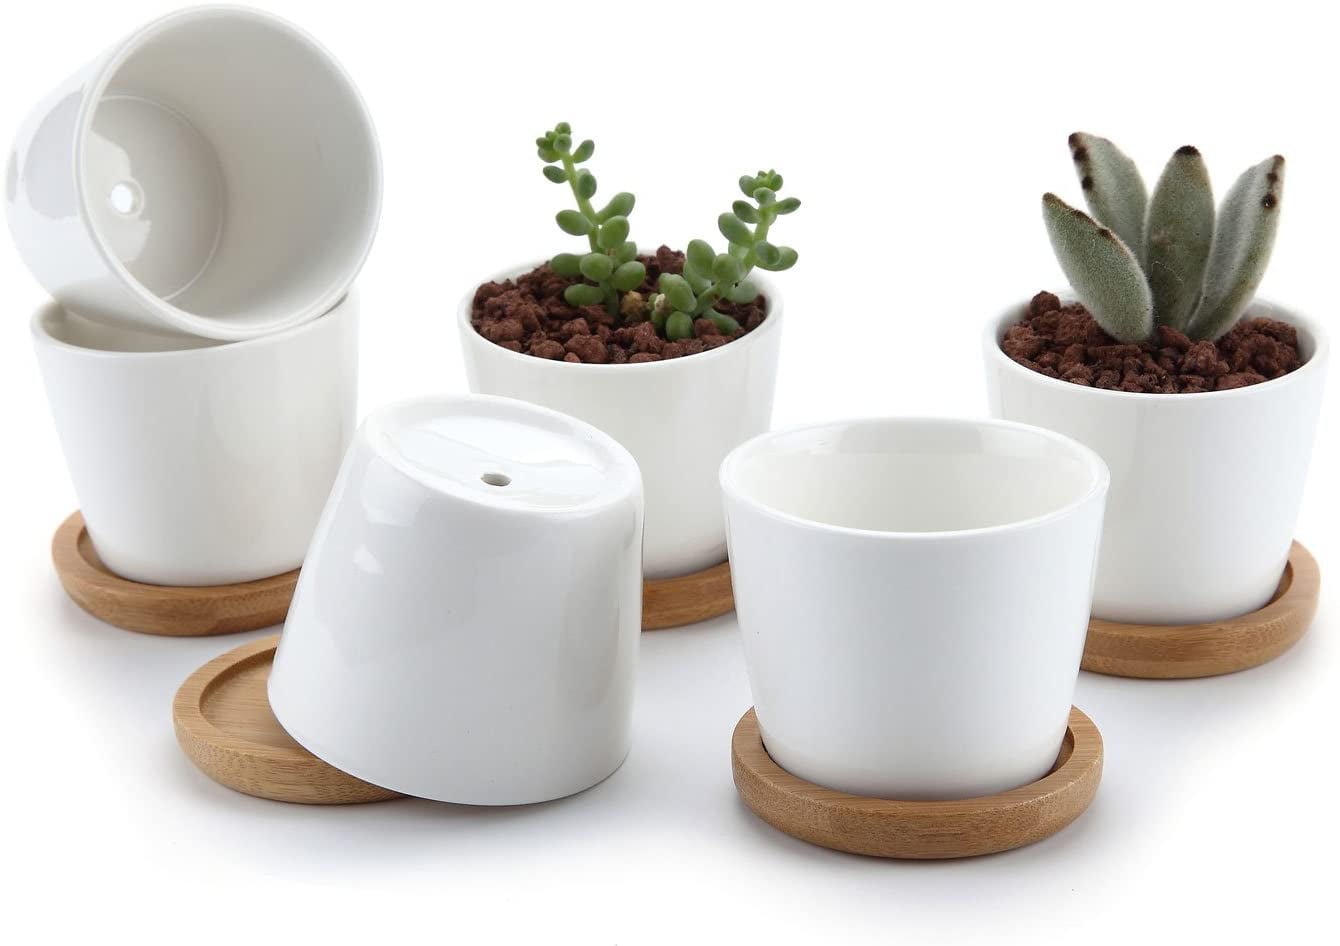 2.5 Inch Ceramic Succulent Planter Pot with Bamboo Saucer Details about   Set of 3 